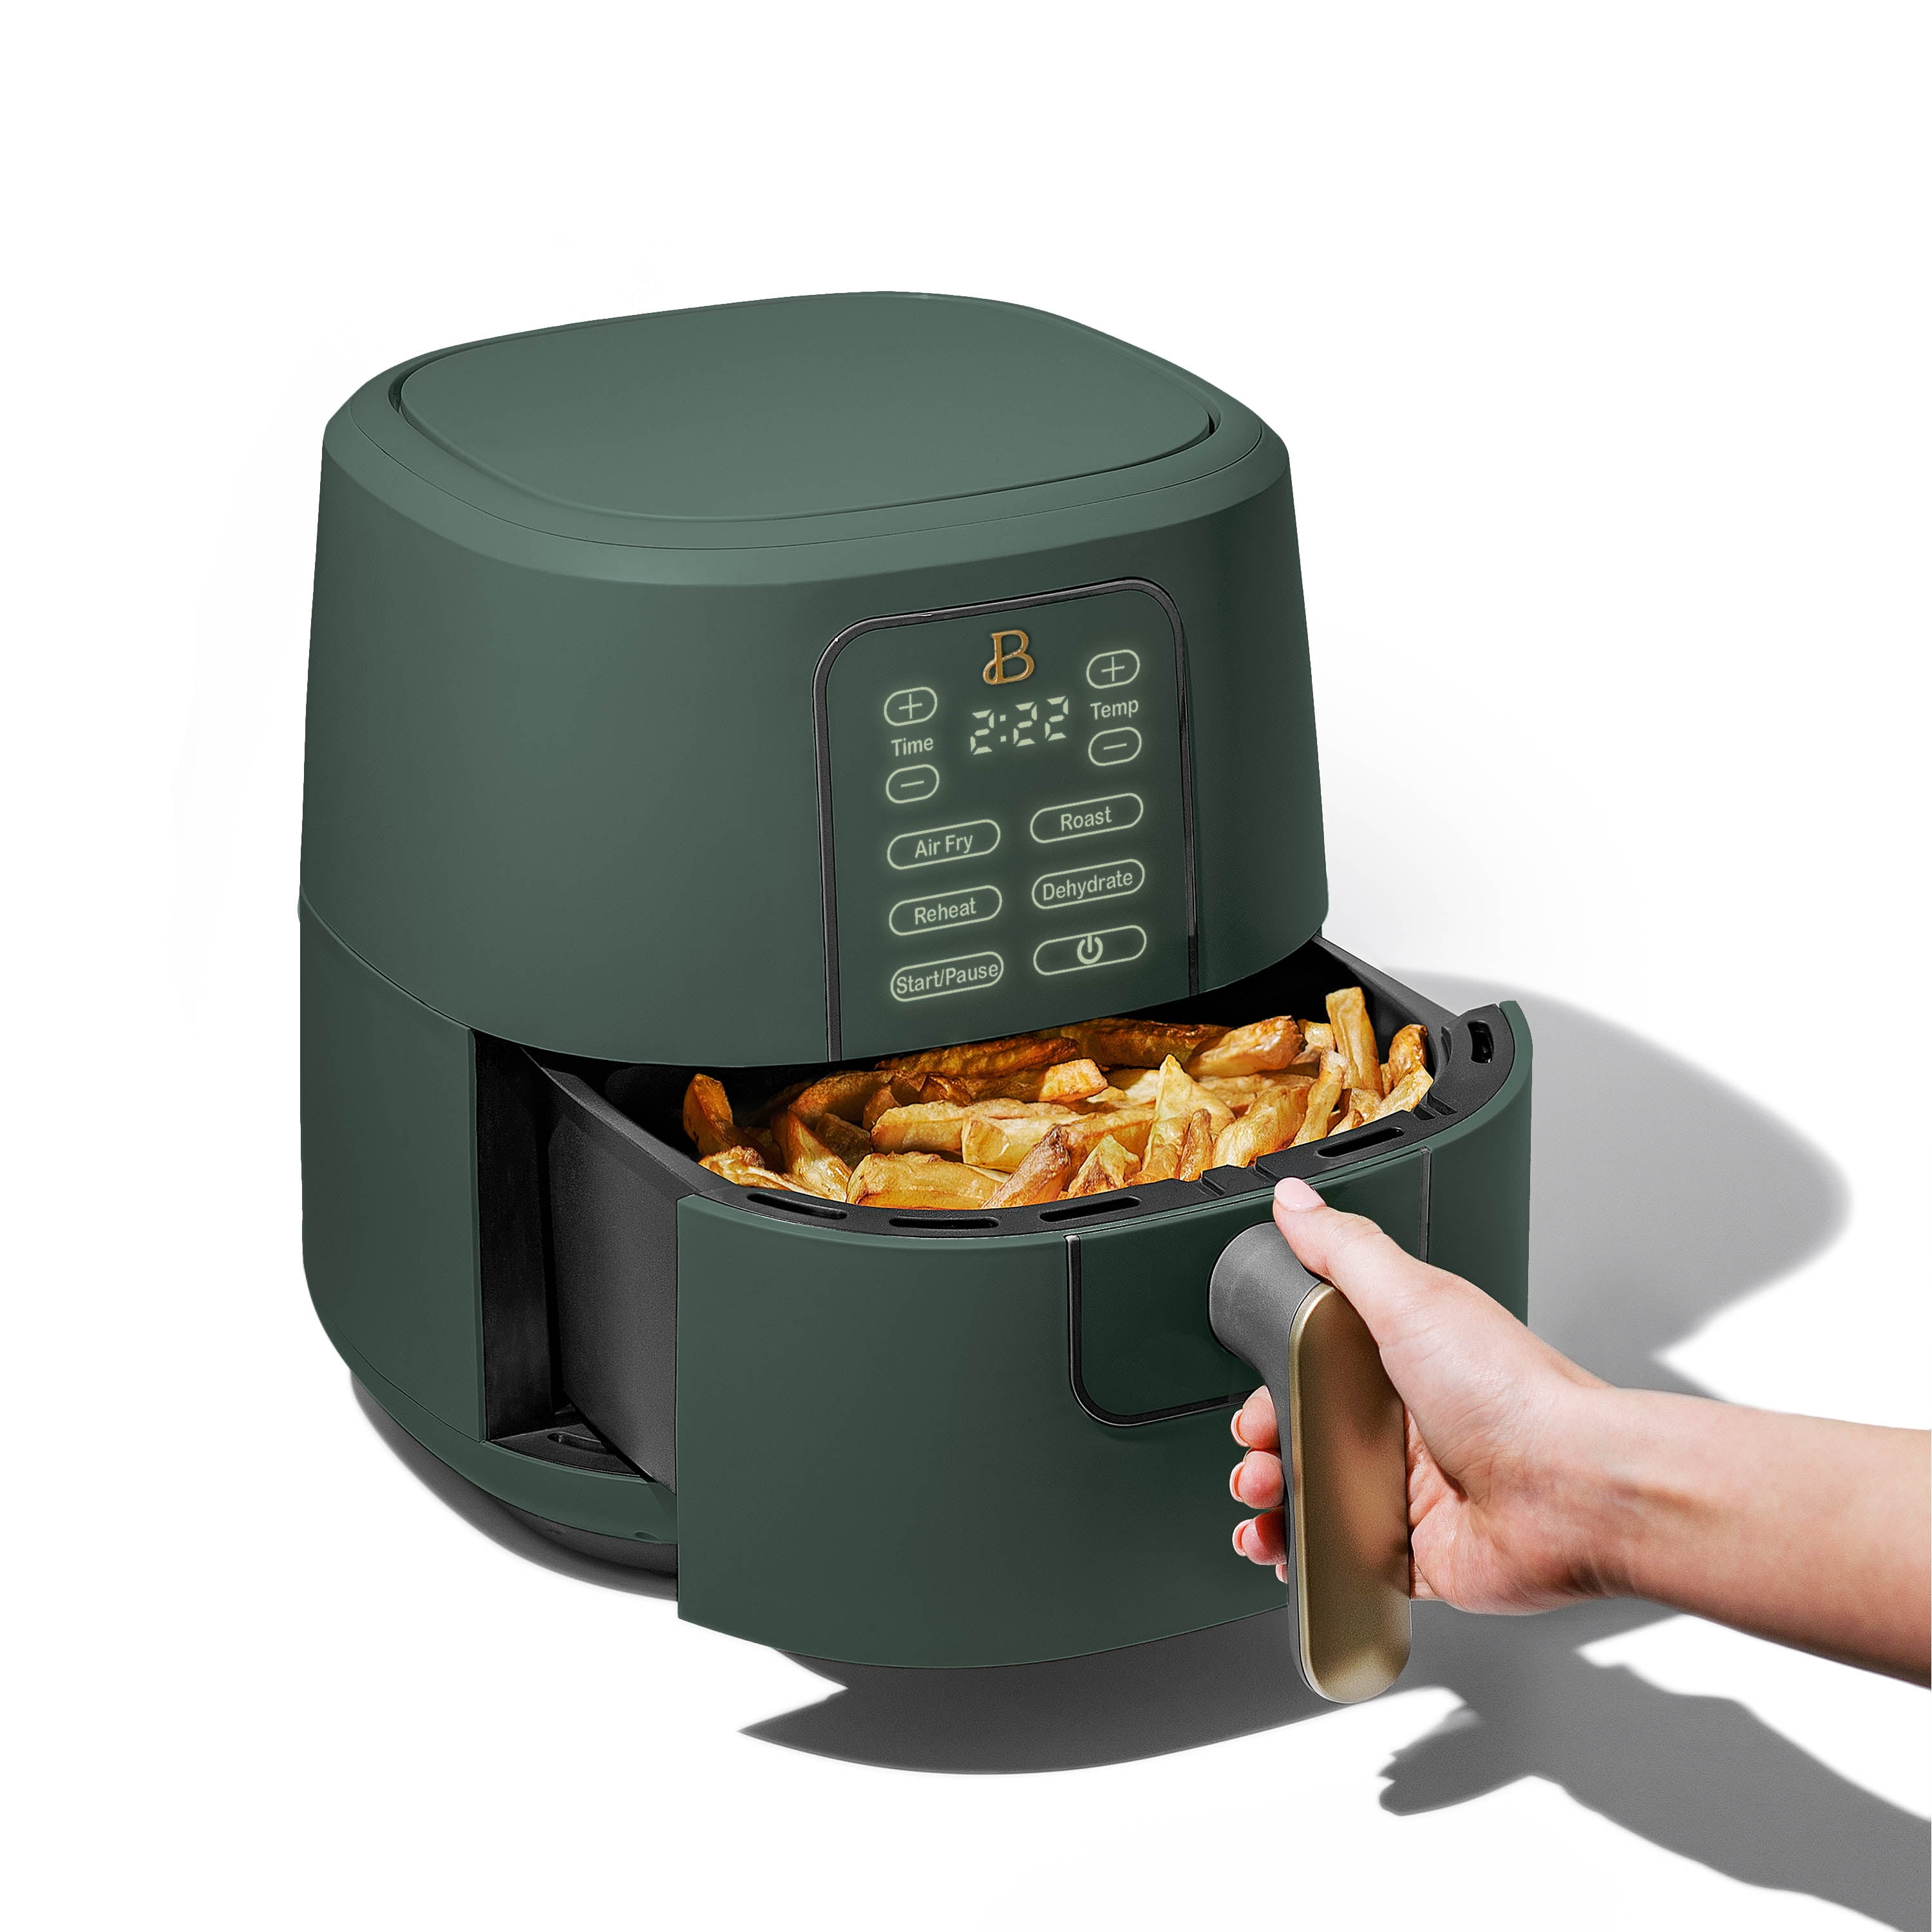 Walmart just marked down its best-selling (and prettiest) air fryer from  Drew Barrymore's kitchen line